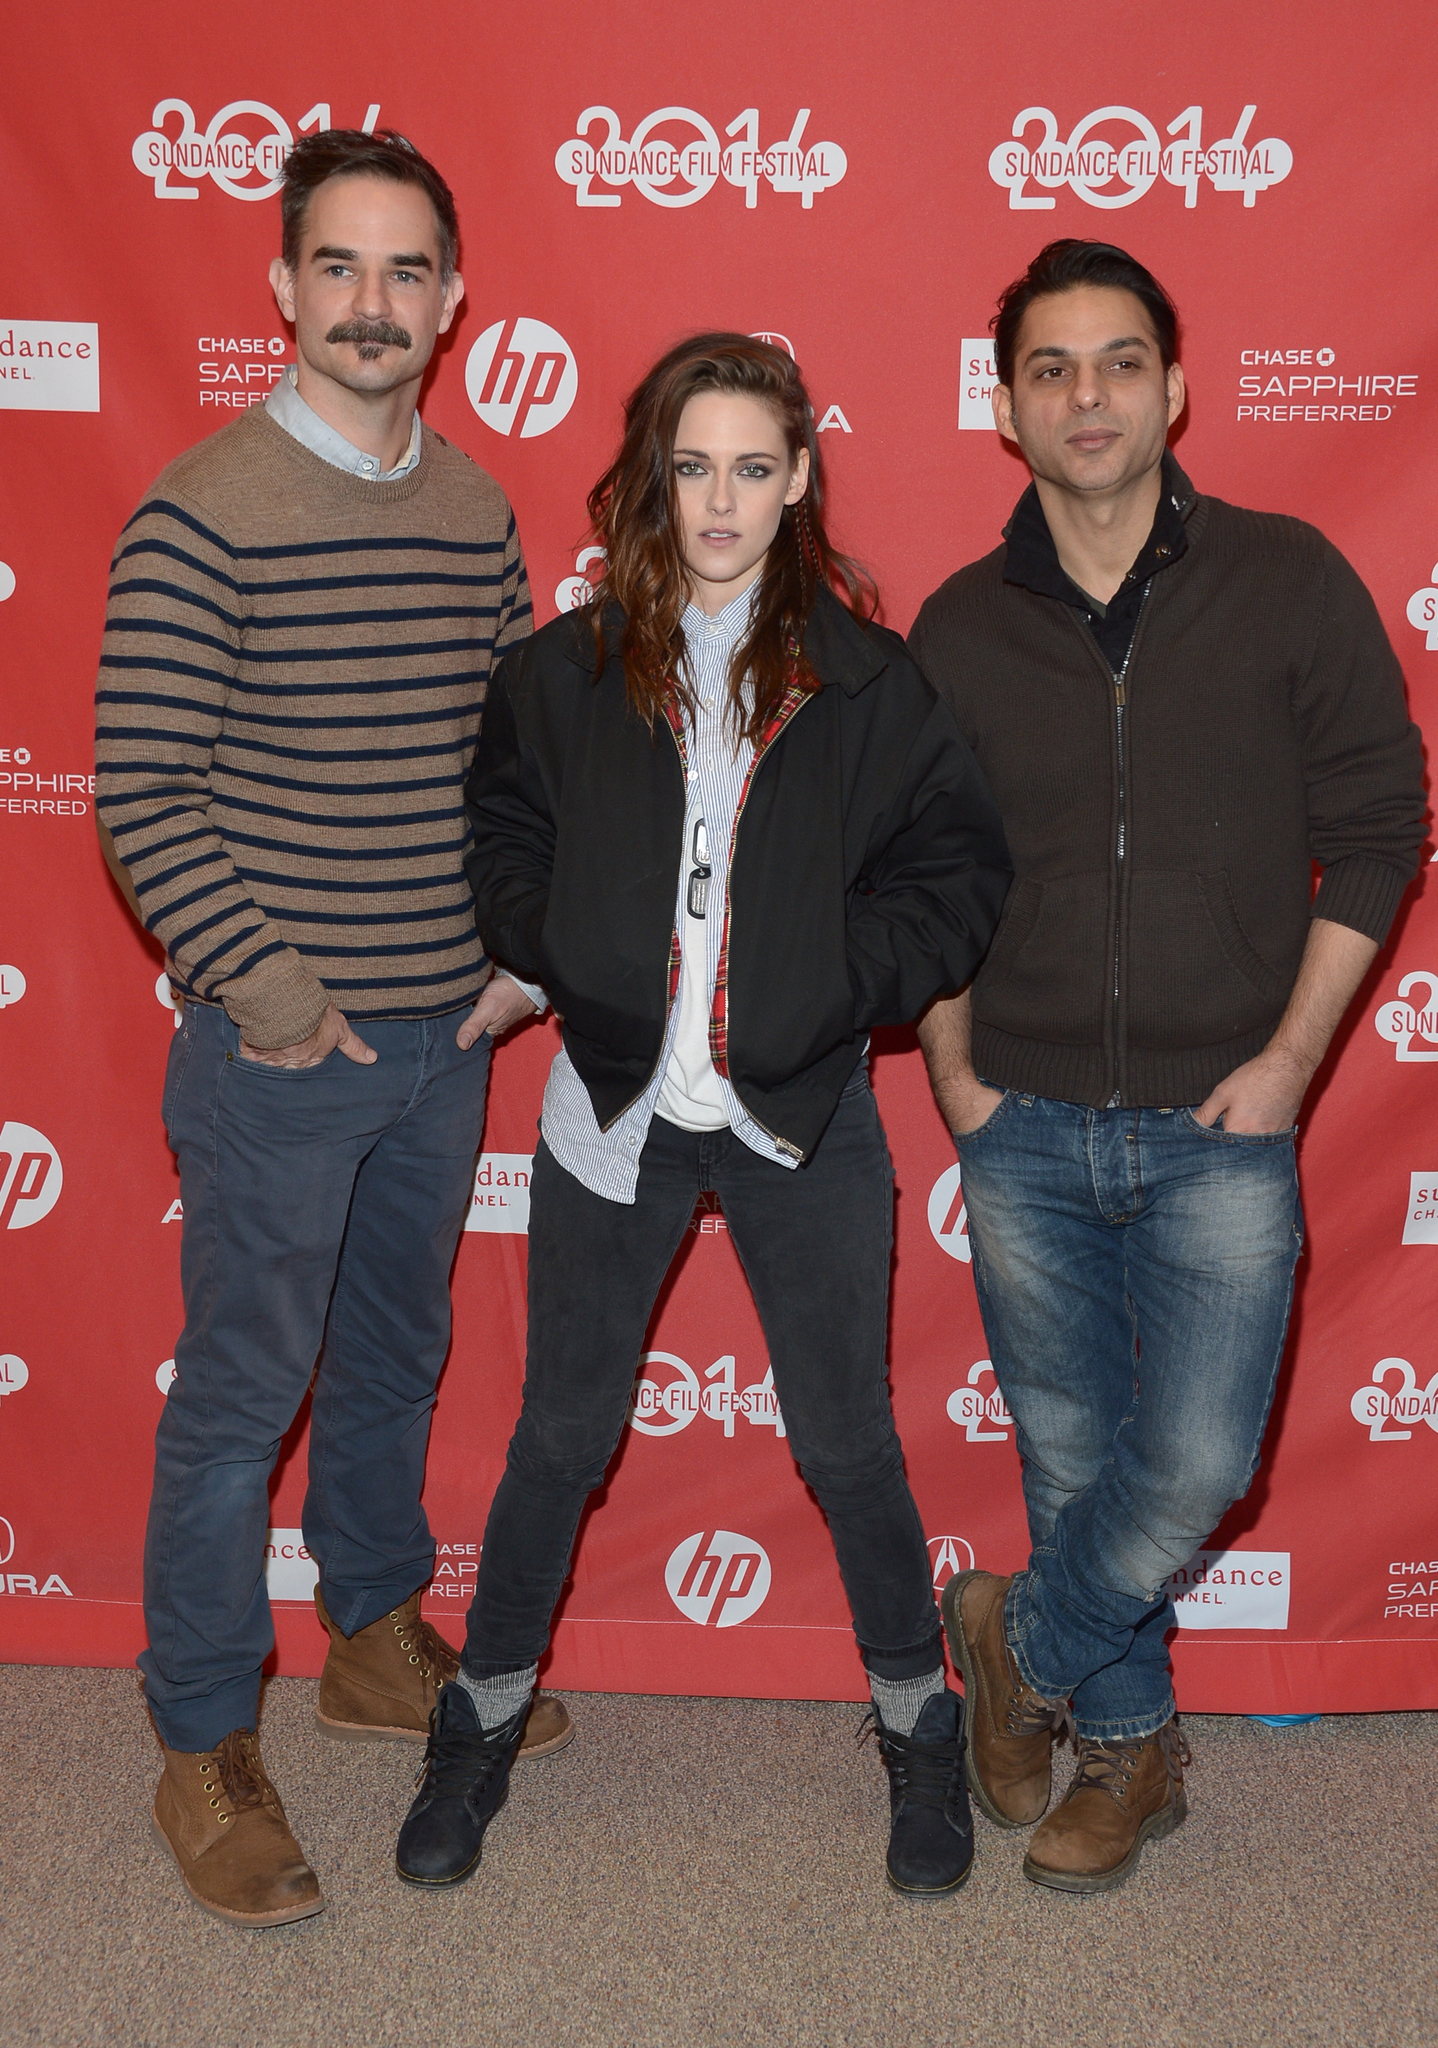 Kristen Stewart, Peter Sattler and Peyman Moaadi at event of Camp X-Ray (2014)